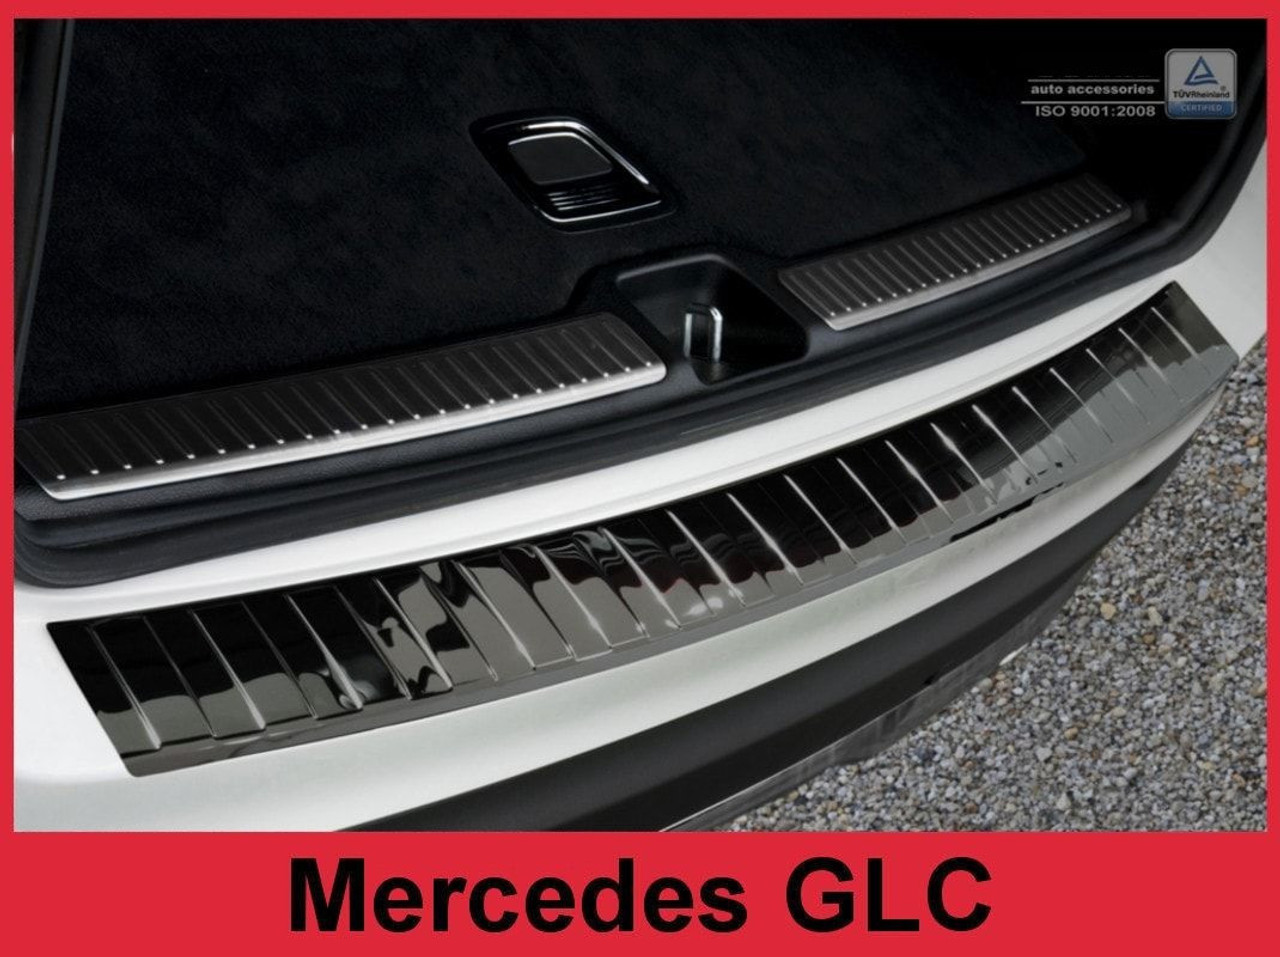 2016-2018 Mercedes GLC - Stainless Steel Rear Bumper Protector